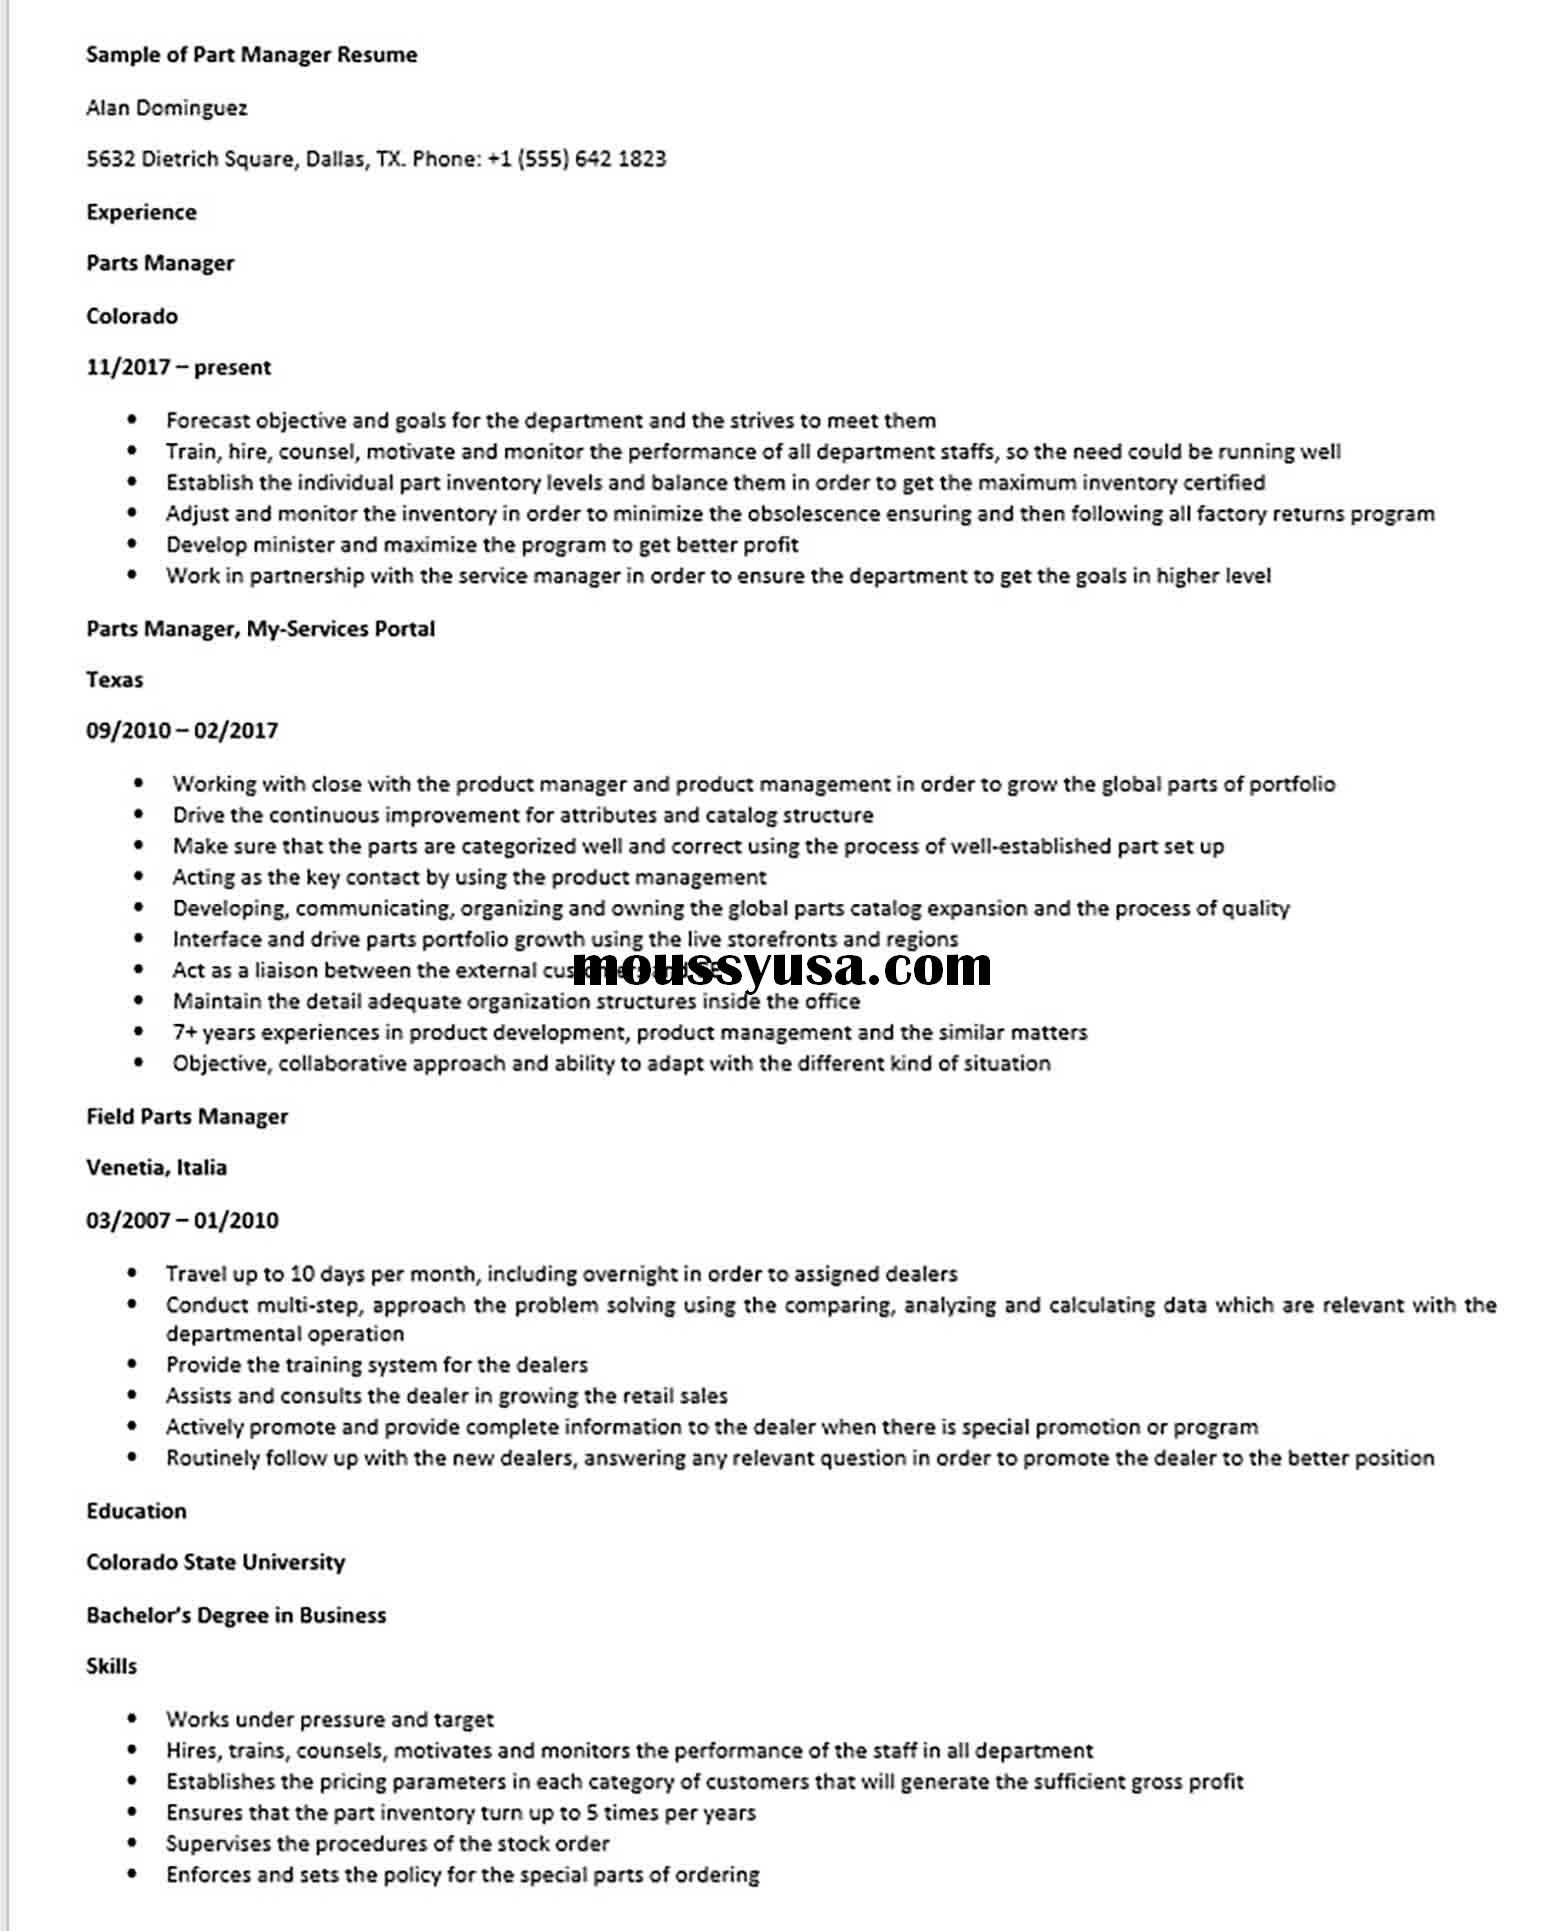 Sample of Part Manager Resume